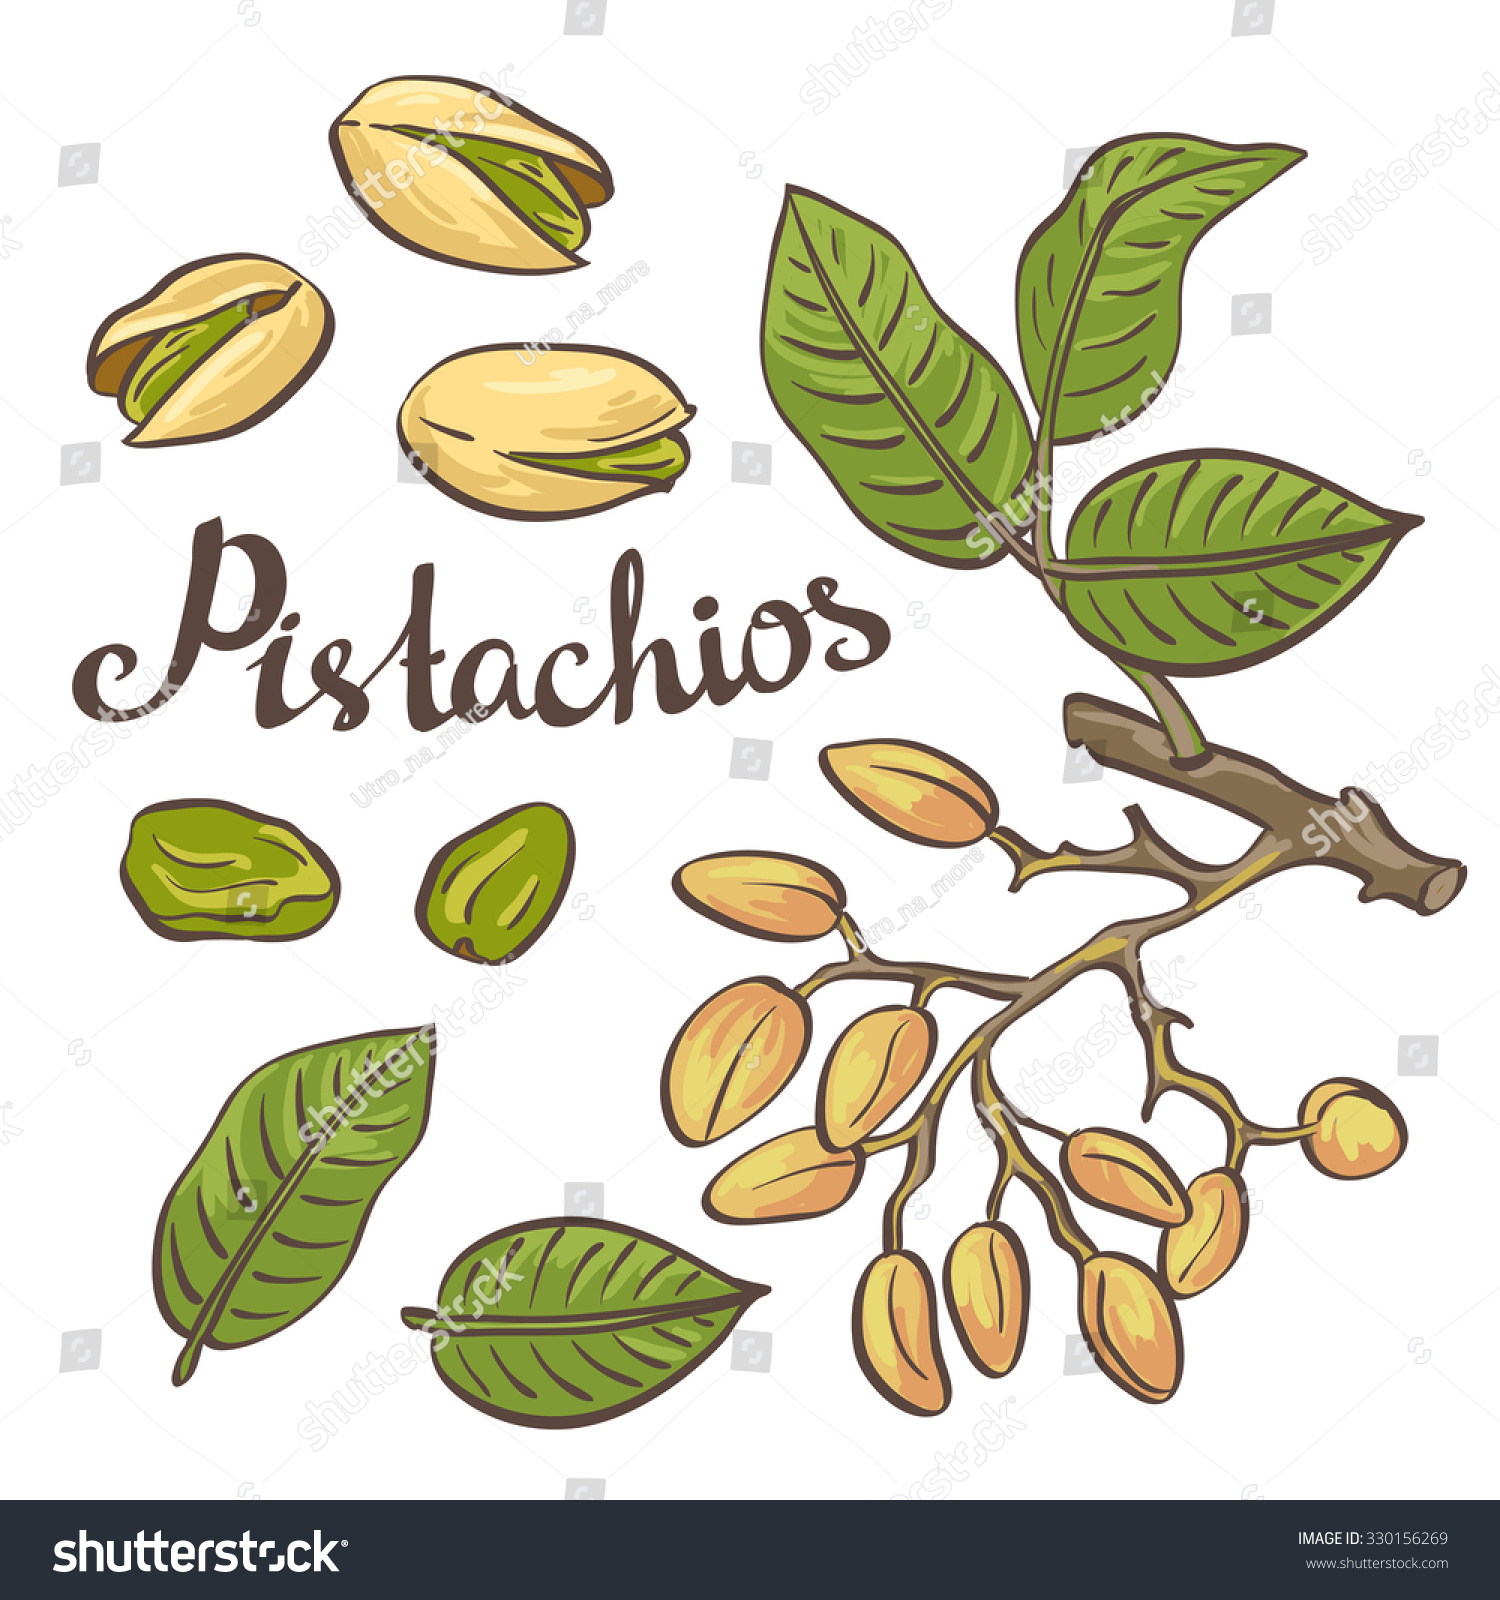 clipart of tree nuts - photo #32